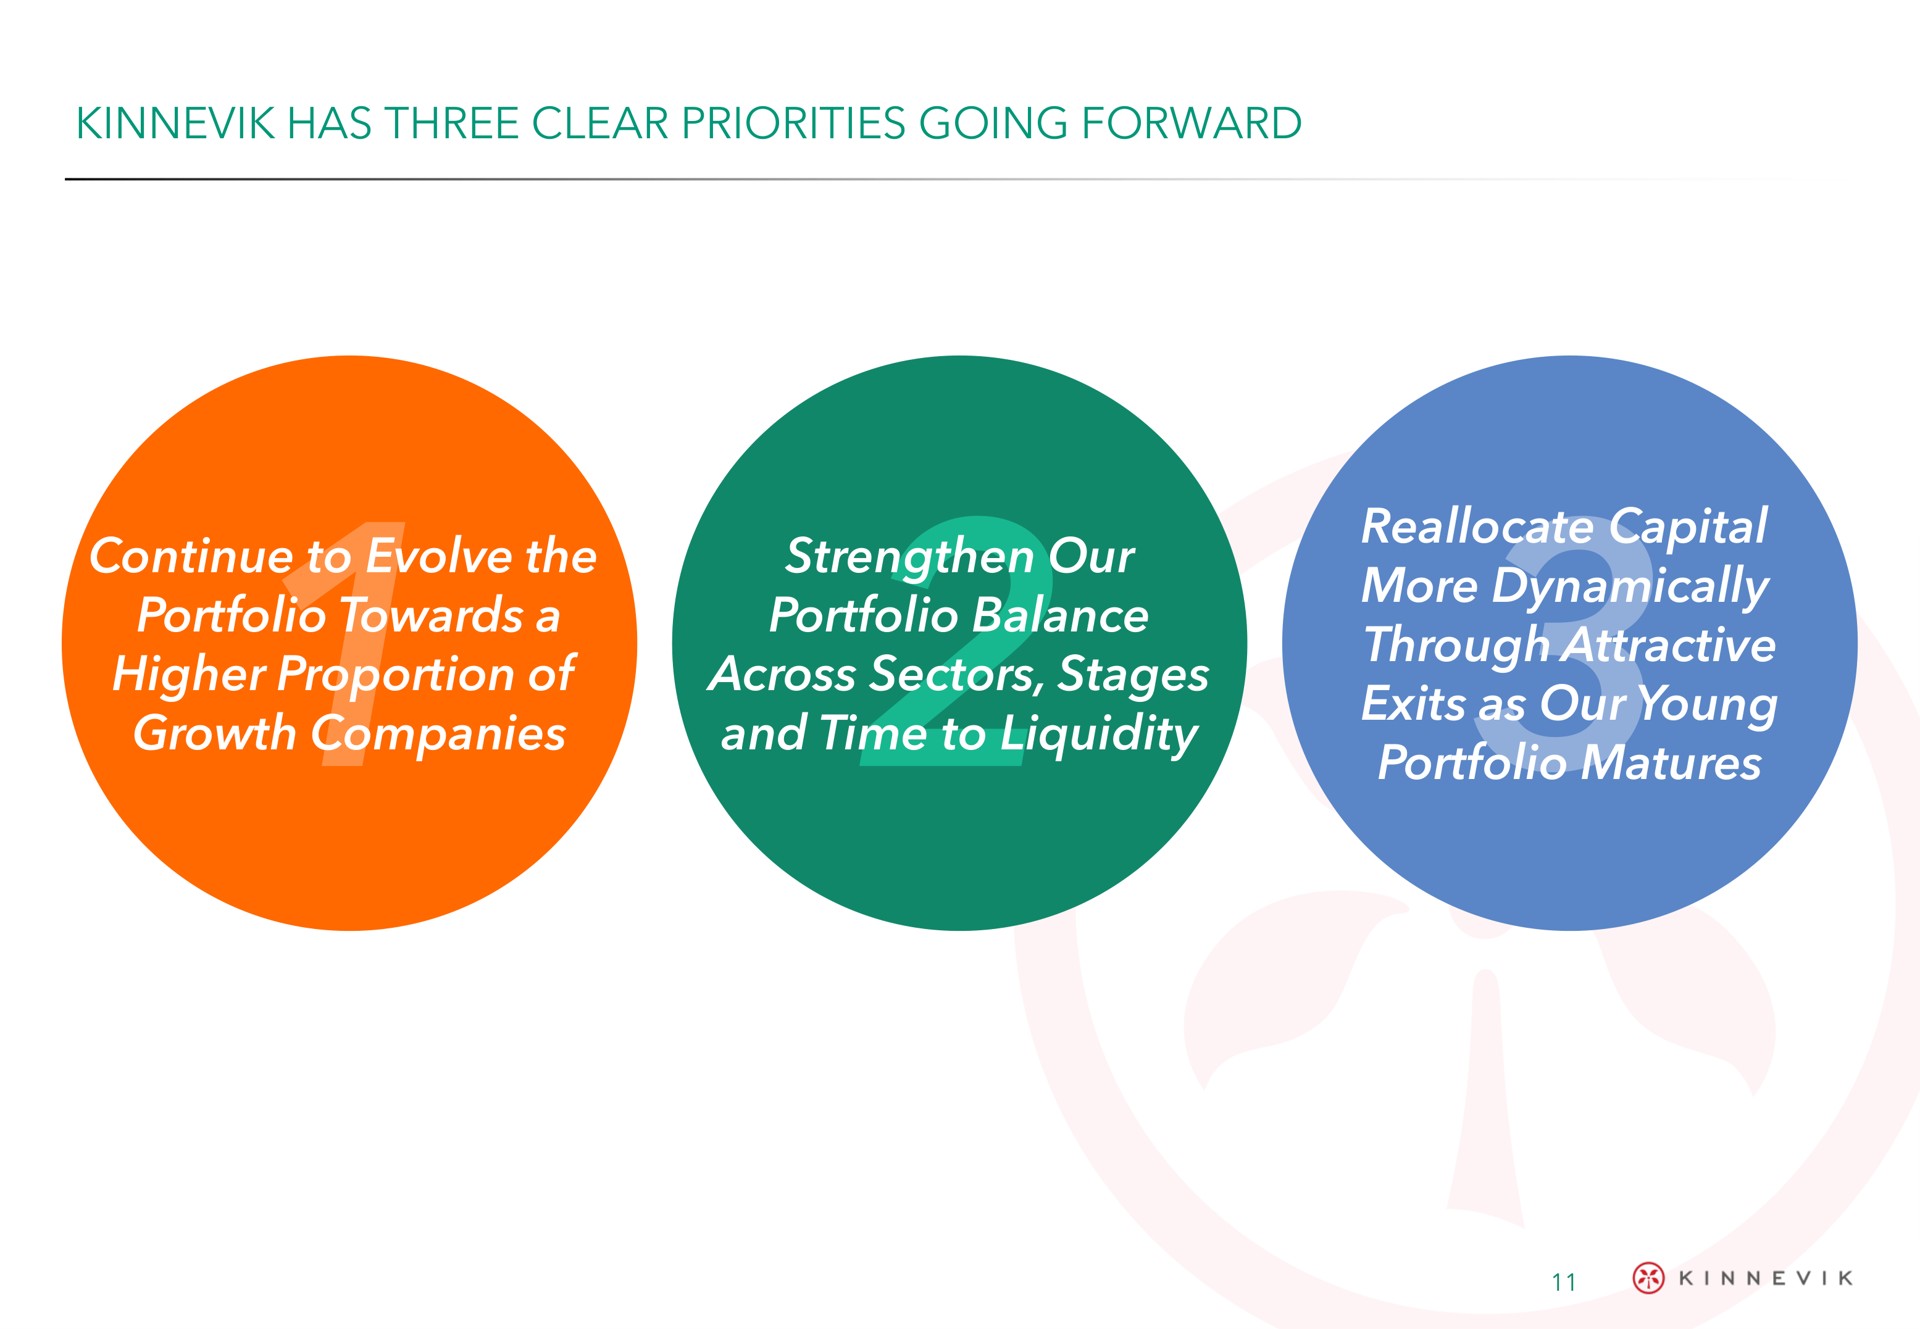 has three clear priorities going forward continue to evolve the portfolio towards a higher proportion of growth companies strengthen our portfolio balance across sectors stages and time to liquidity reallocate capital more dynamically through attractive exits as our young portfolio matures yale lees vare wet ars via web | Kinnevik